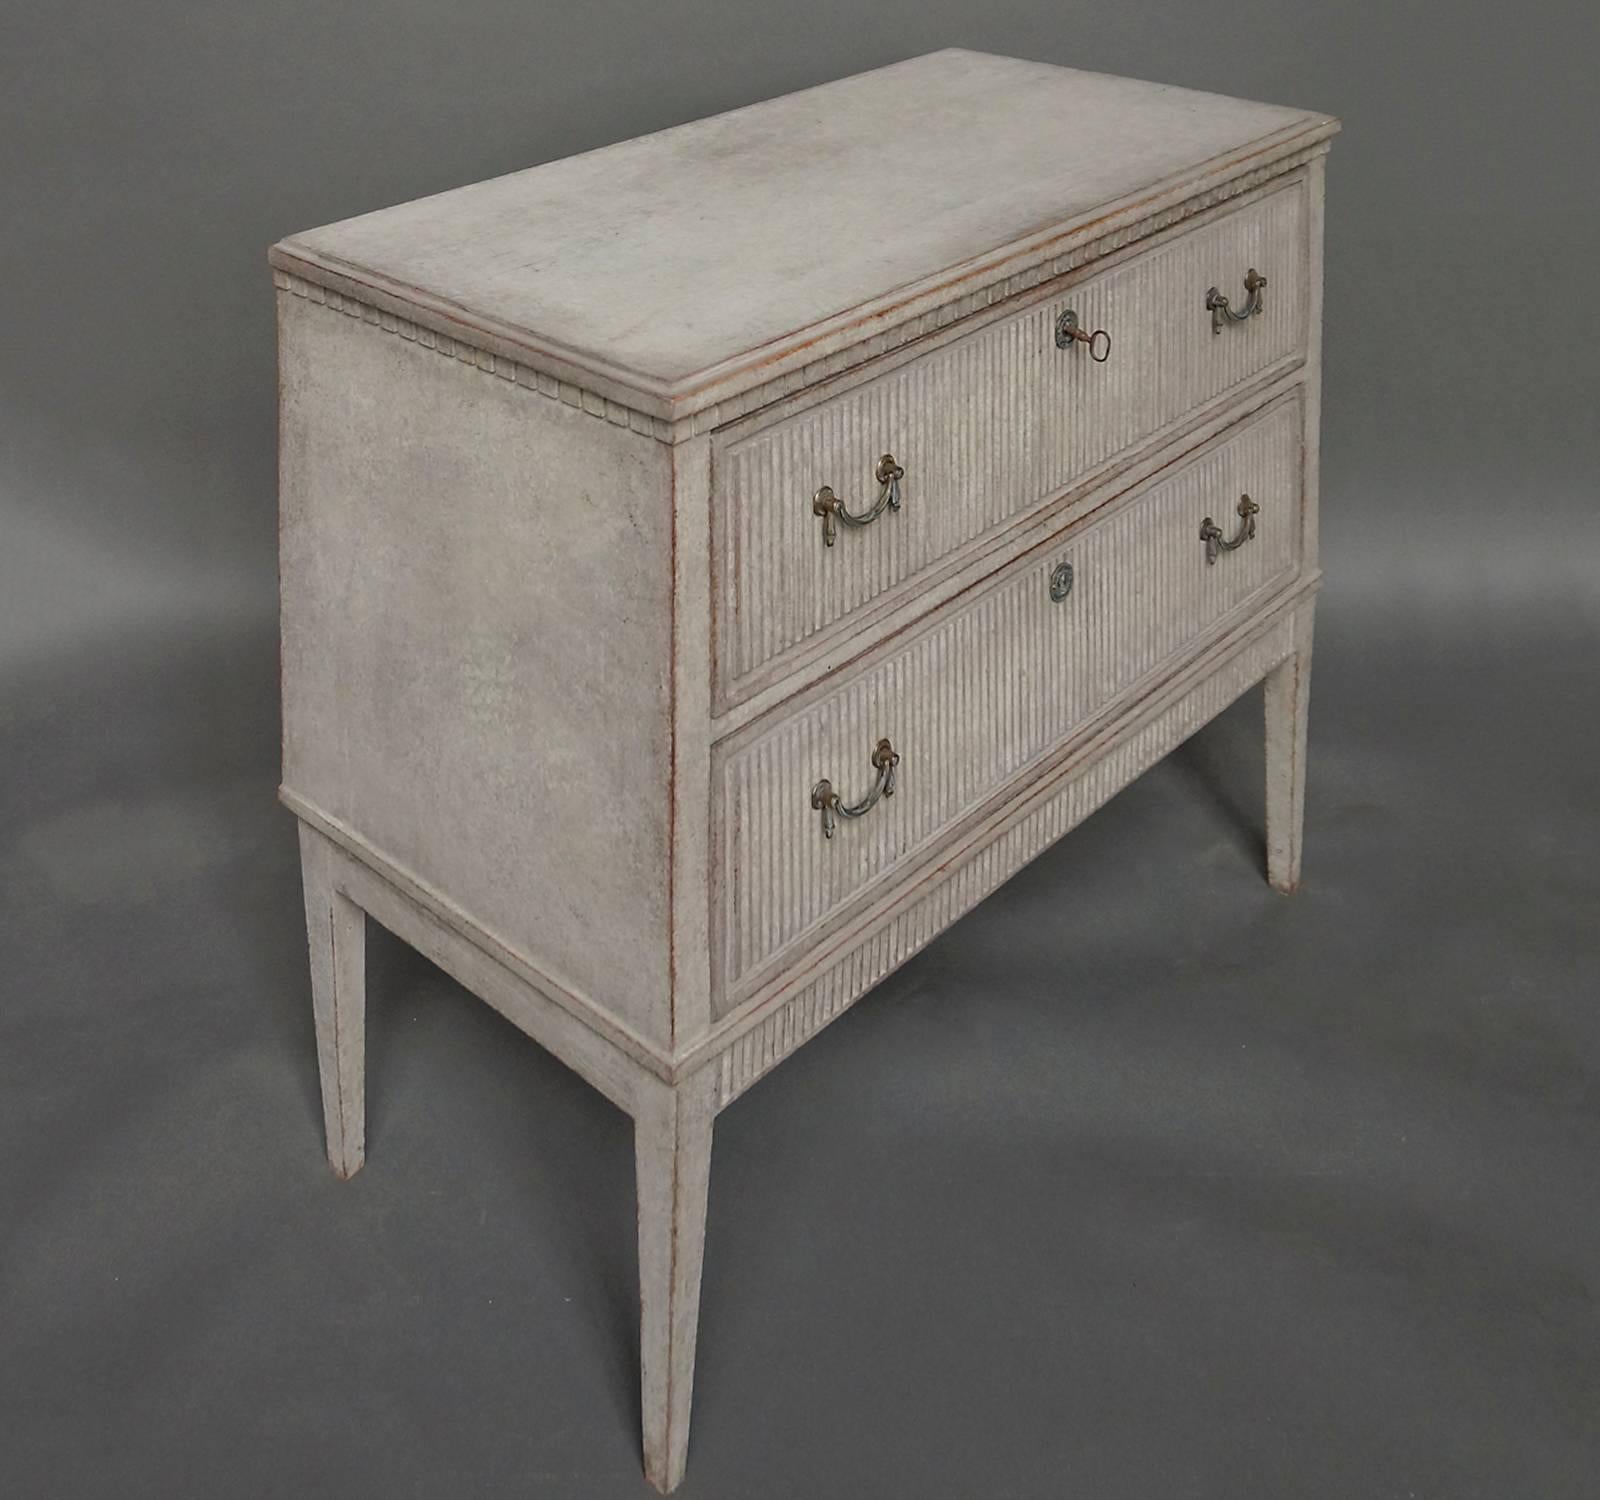 Chest of drawers, Sweden, circa 1880, with dentil molding under the stepped top. Reeded drawer fronts with original hardware. Tapering square legs with reeded apron at the front.